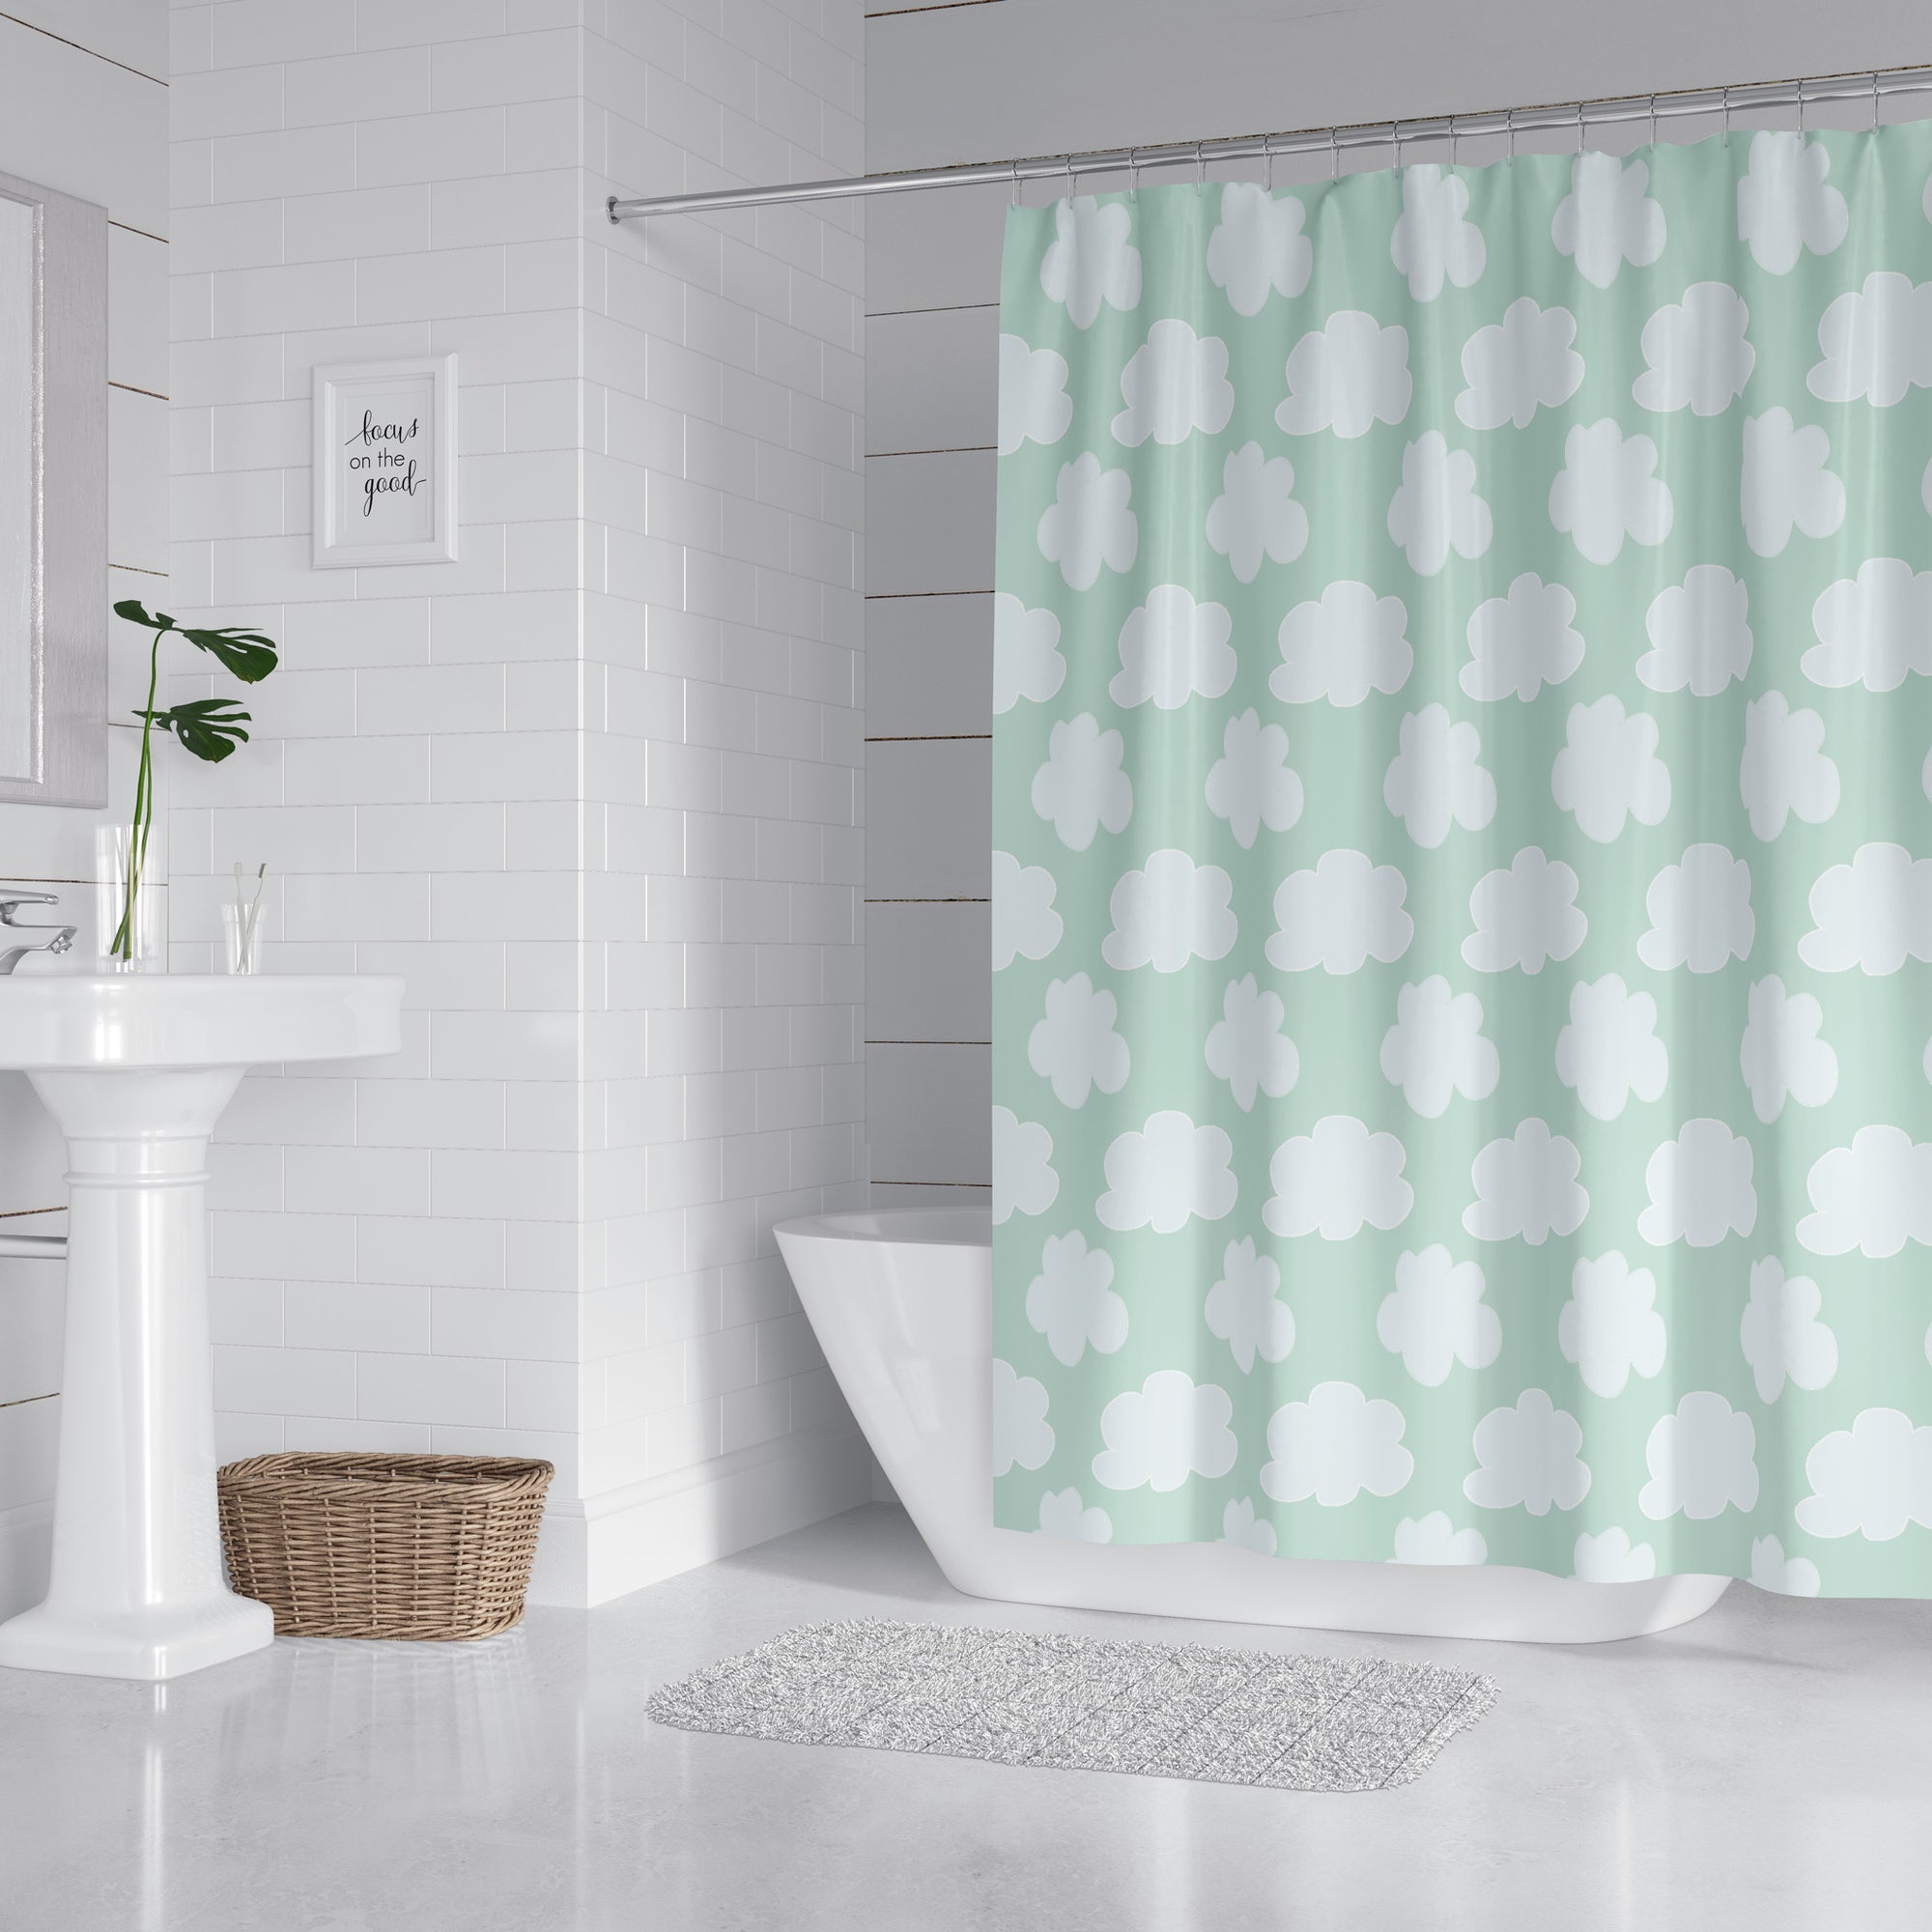 Cloudy Day Shower Curtain